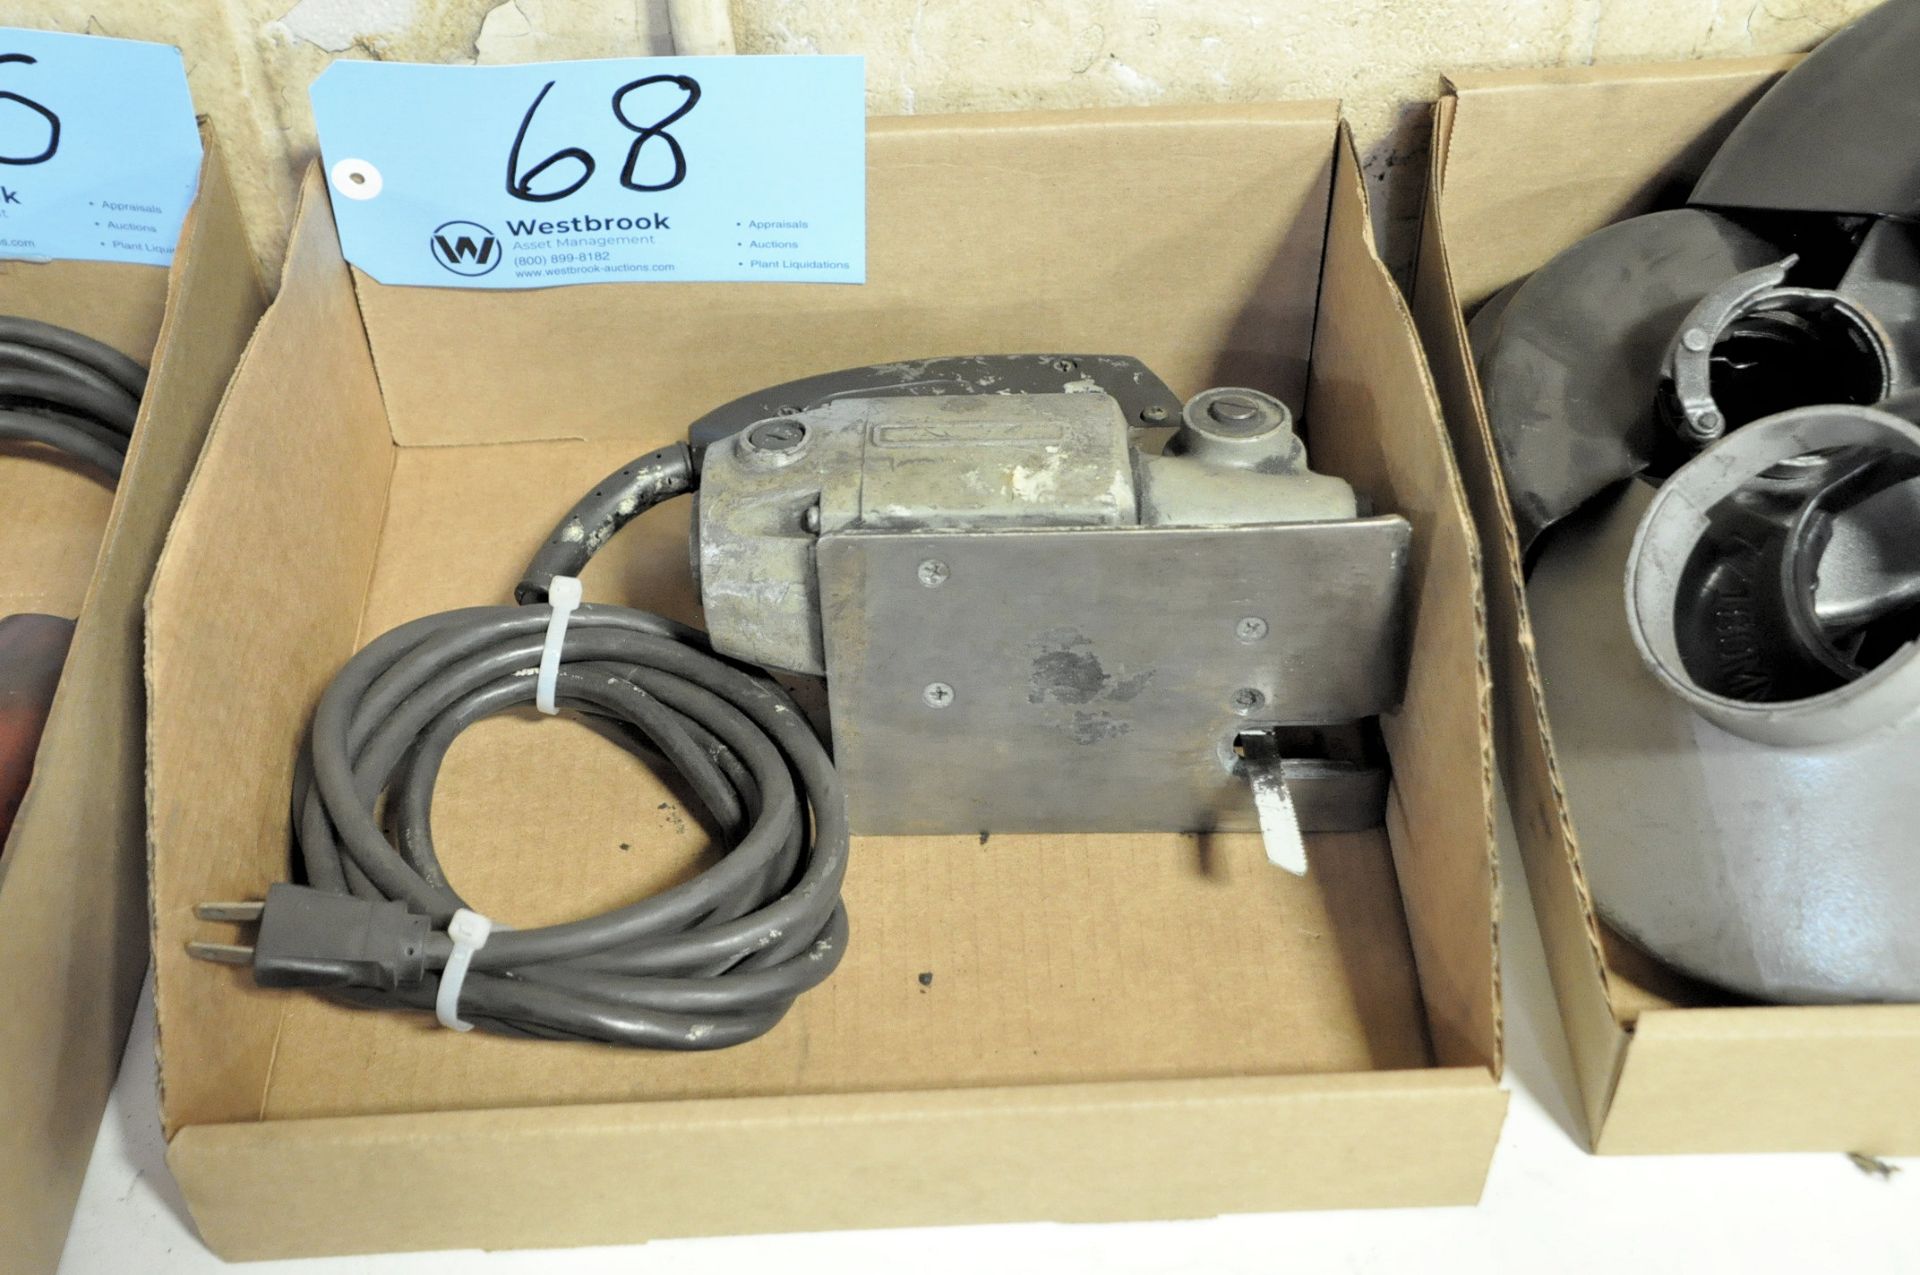 Lot-(2) PORTER CABLE Model 548 Type 3 Electric Jig Saws in (2) Boxes - Image 2 of 2